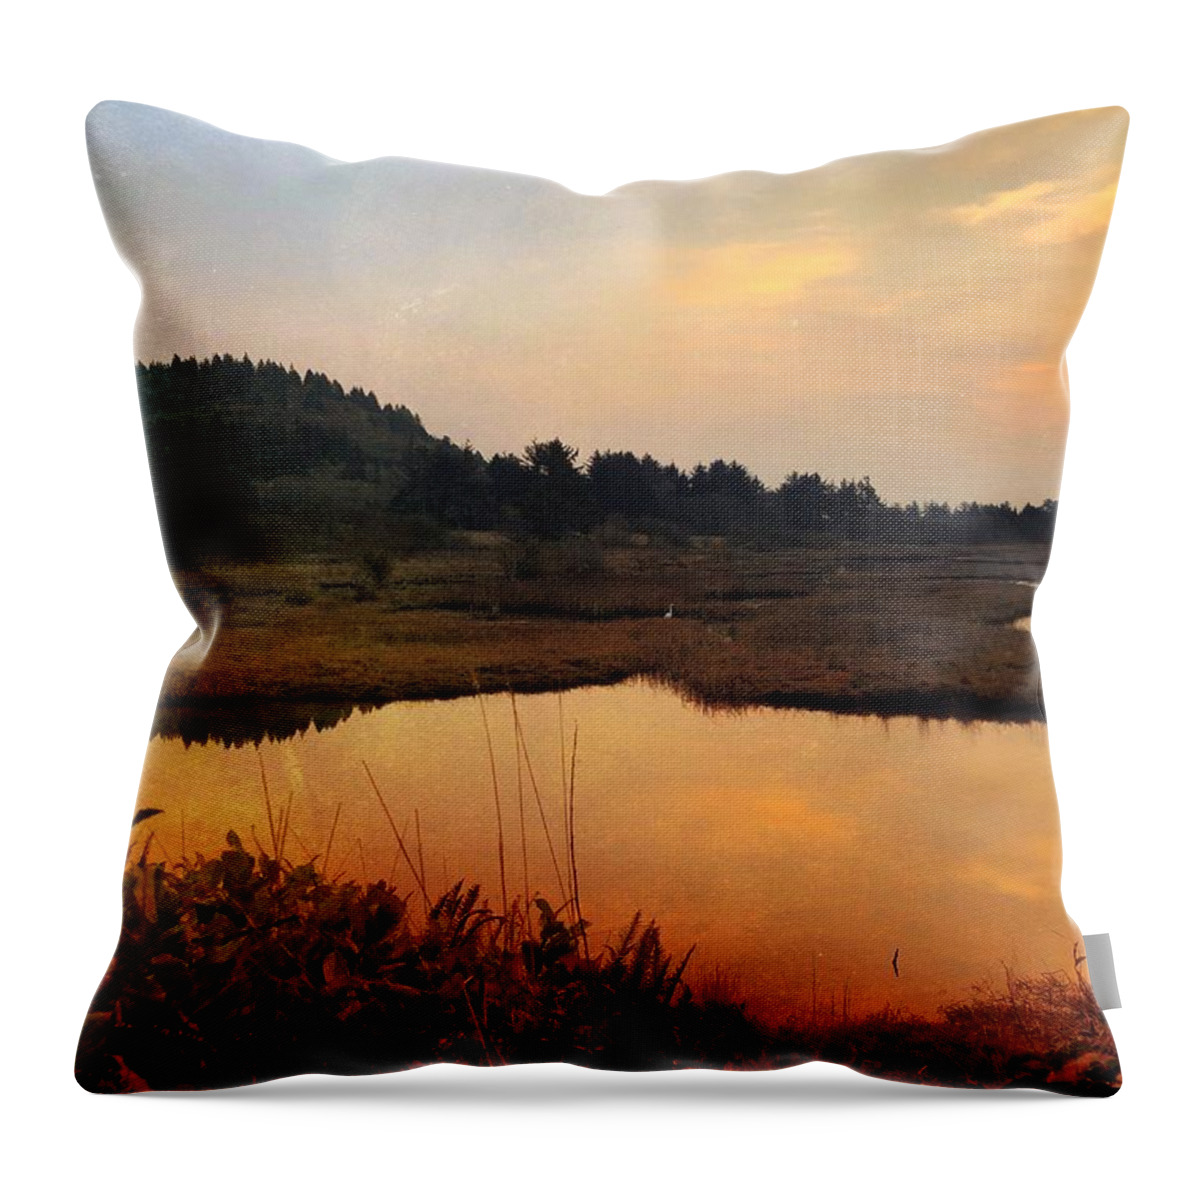 Sunset Throw Pillow featuring the digital art Sitka Sedge Sand Lake Eve by Chriss Pagani